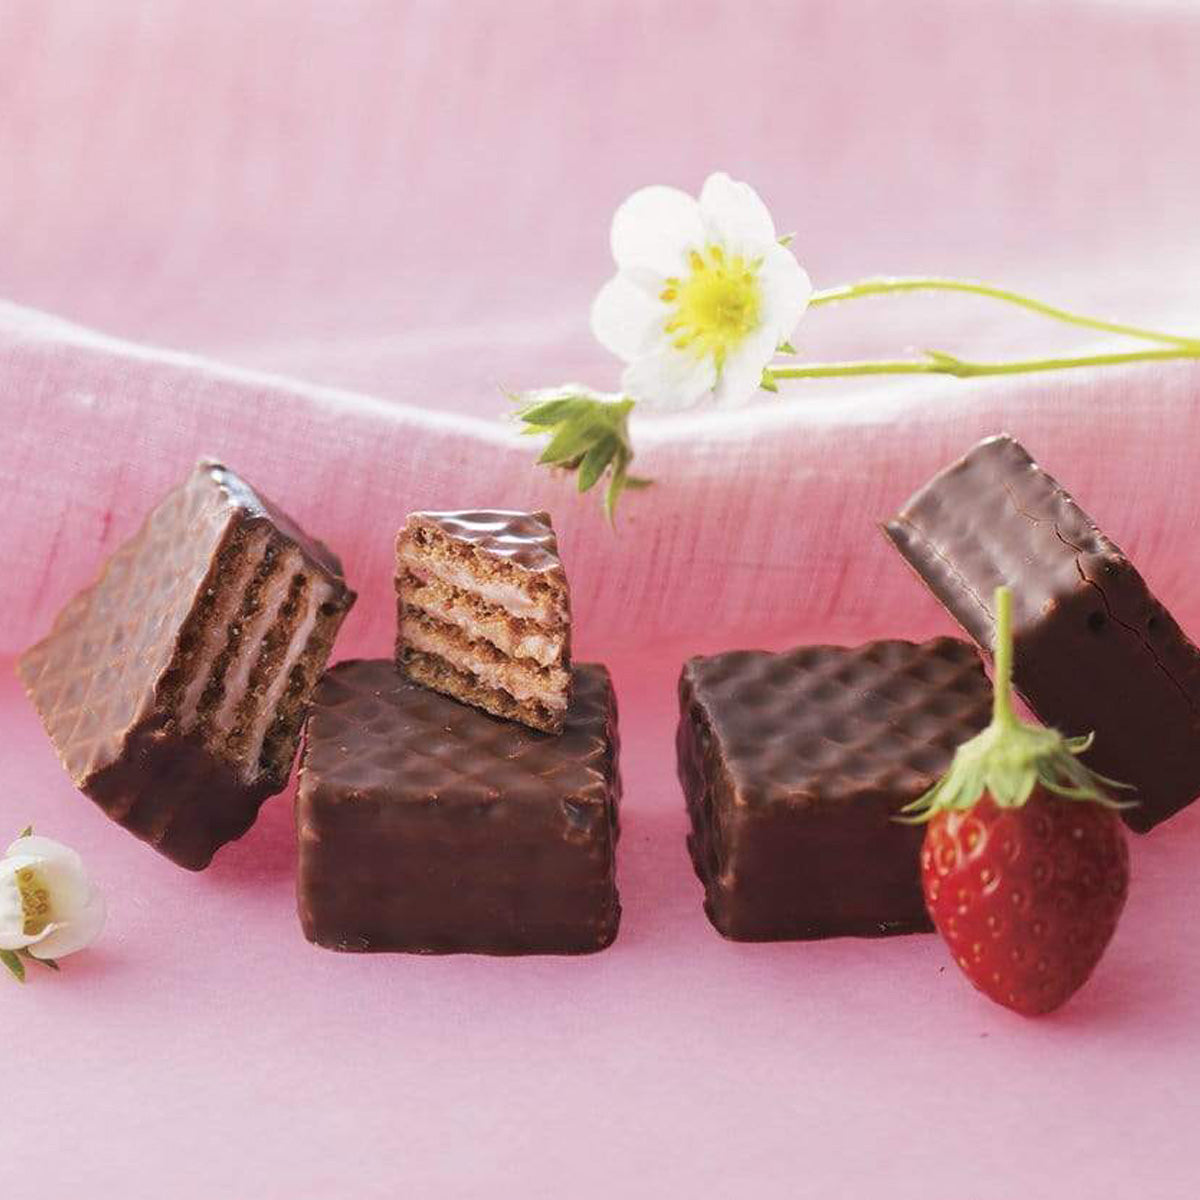 ROYCE' Chocolate - Chocolate Wafers "Strawberry Cream" - Image shows brown chocolate wafers with crisscrossed texture. Accents include a red strawberry and white flowers with green twigs. Background is in pink color.